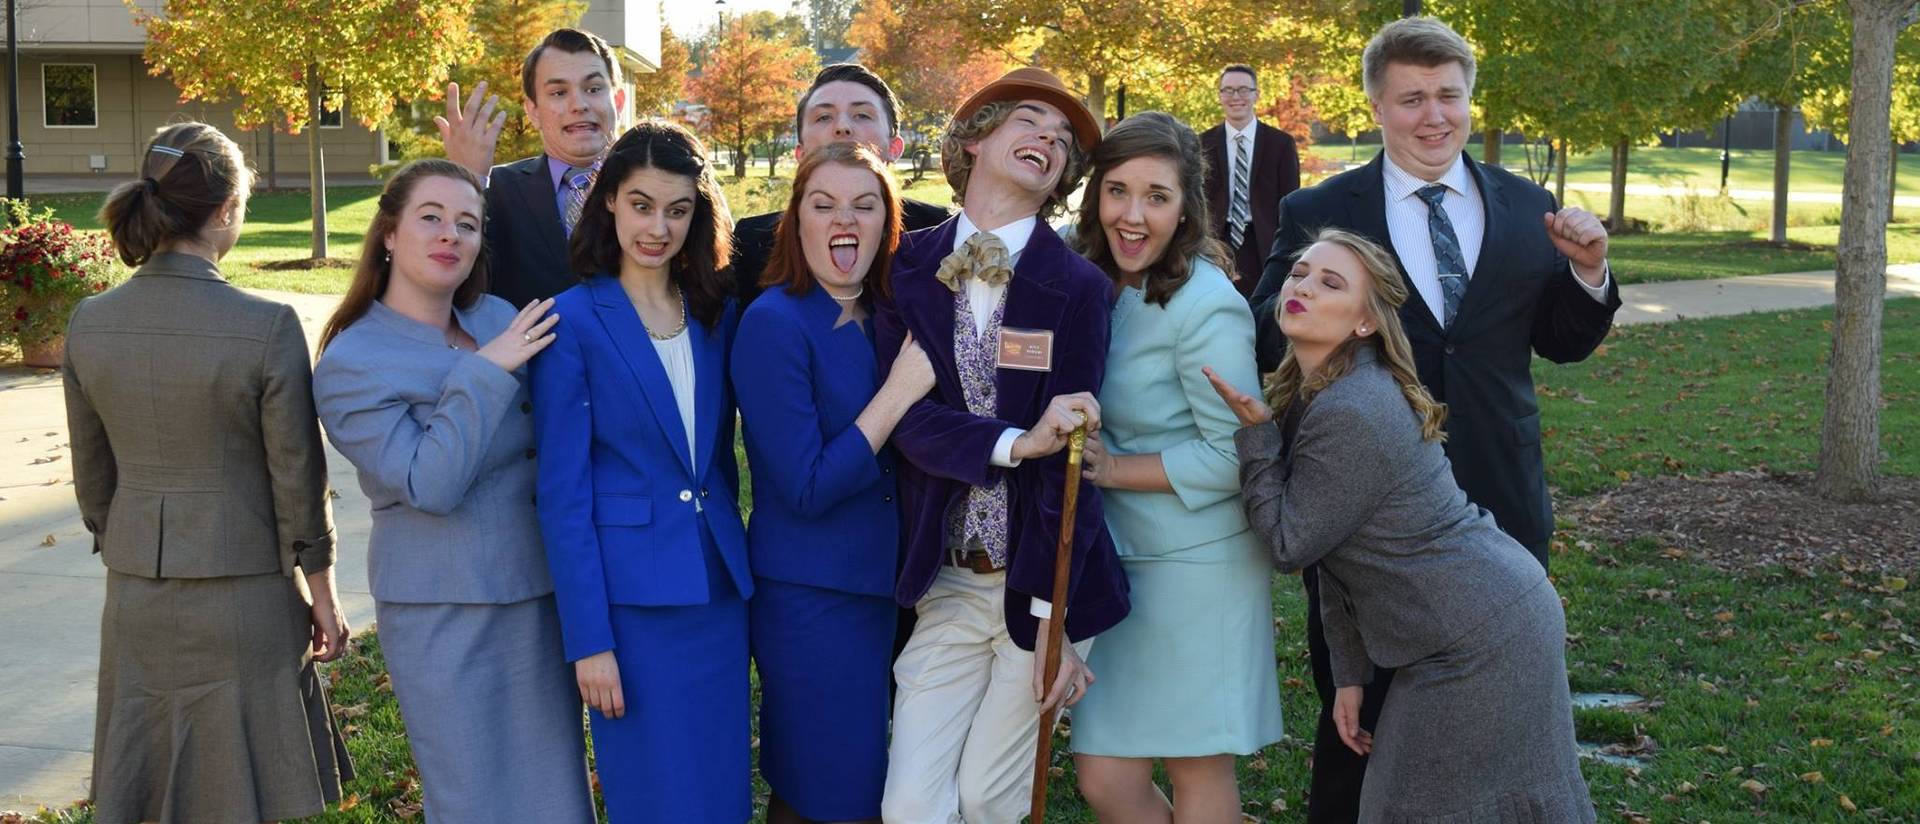 Forensics students make funny faces as they surround a student dressed as Willy Wonka.